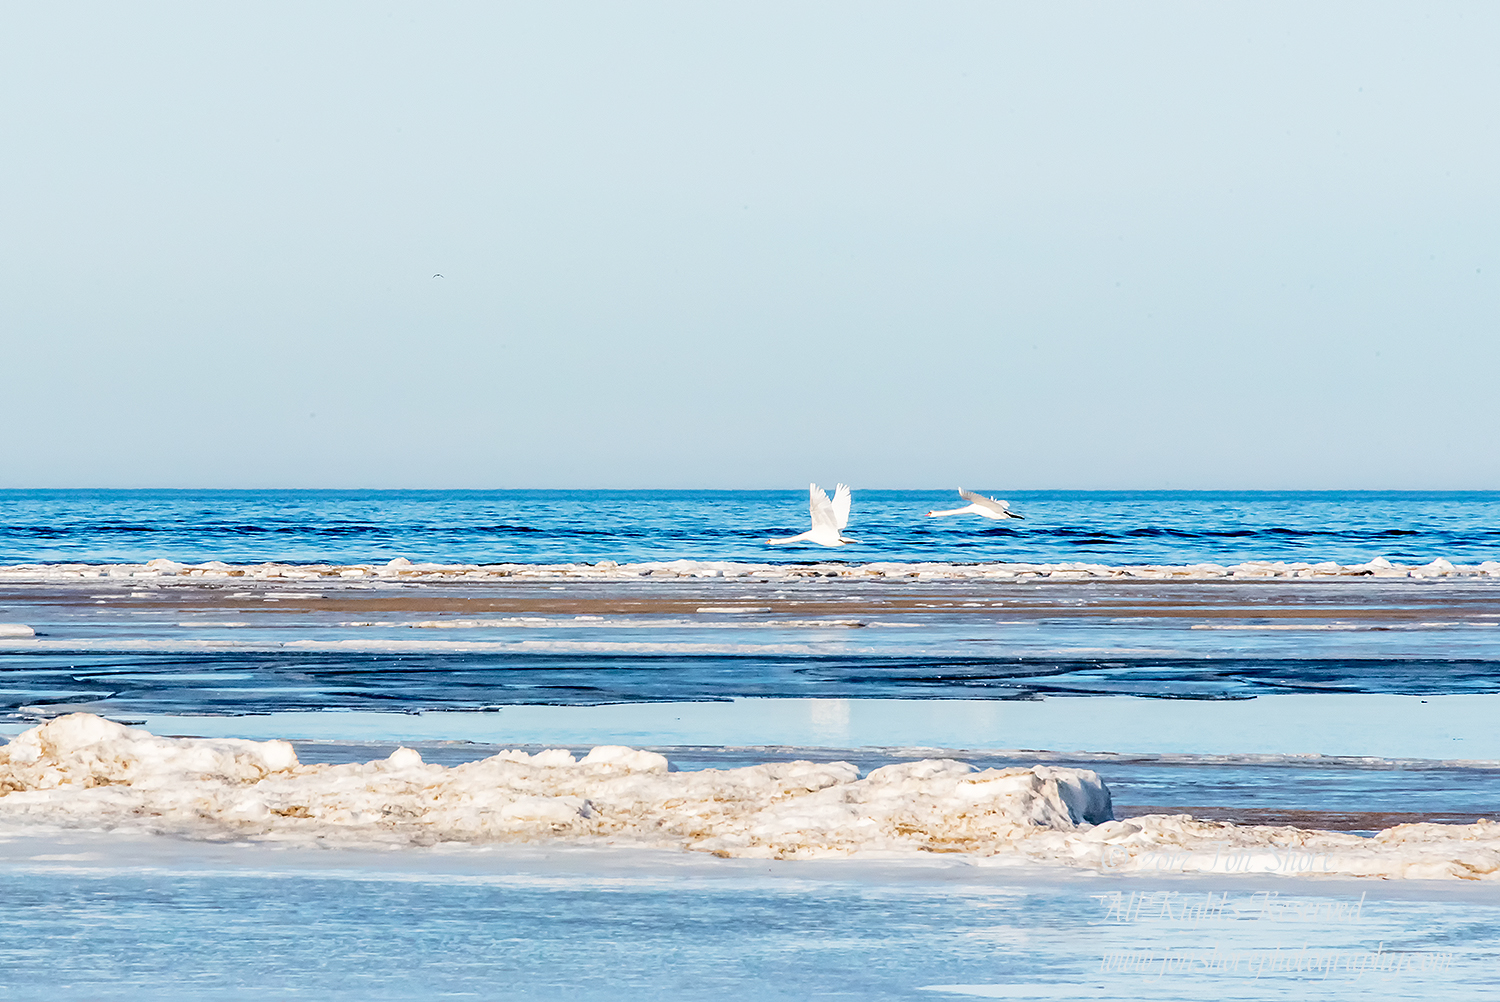 Swans on the Baltic Sea in Winter. Nikkor 300mm